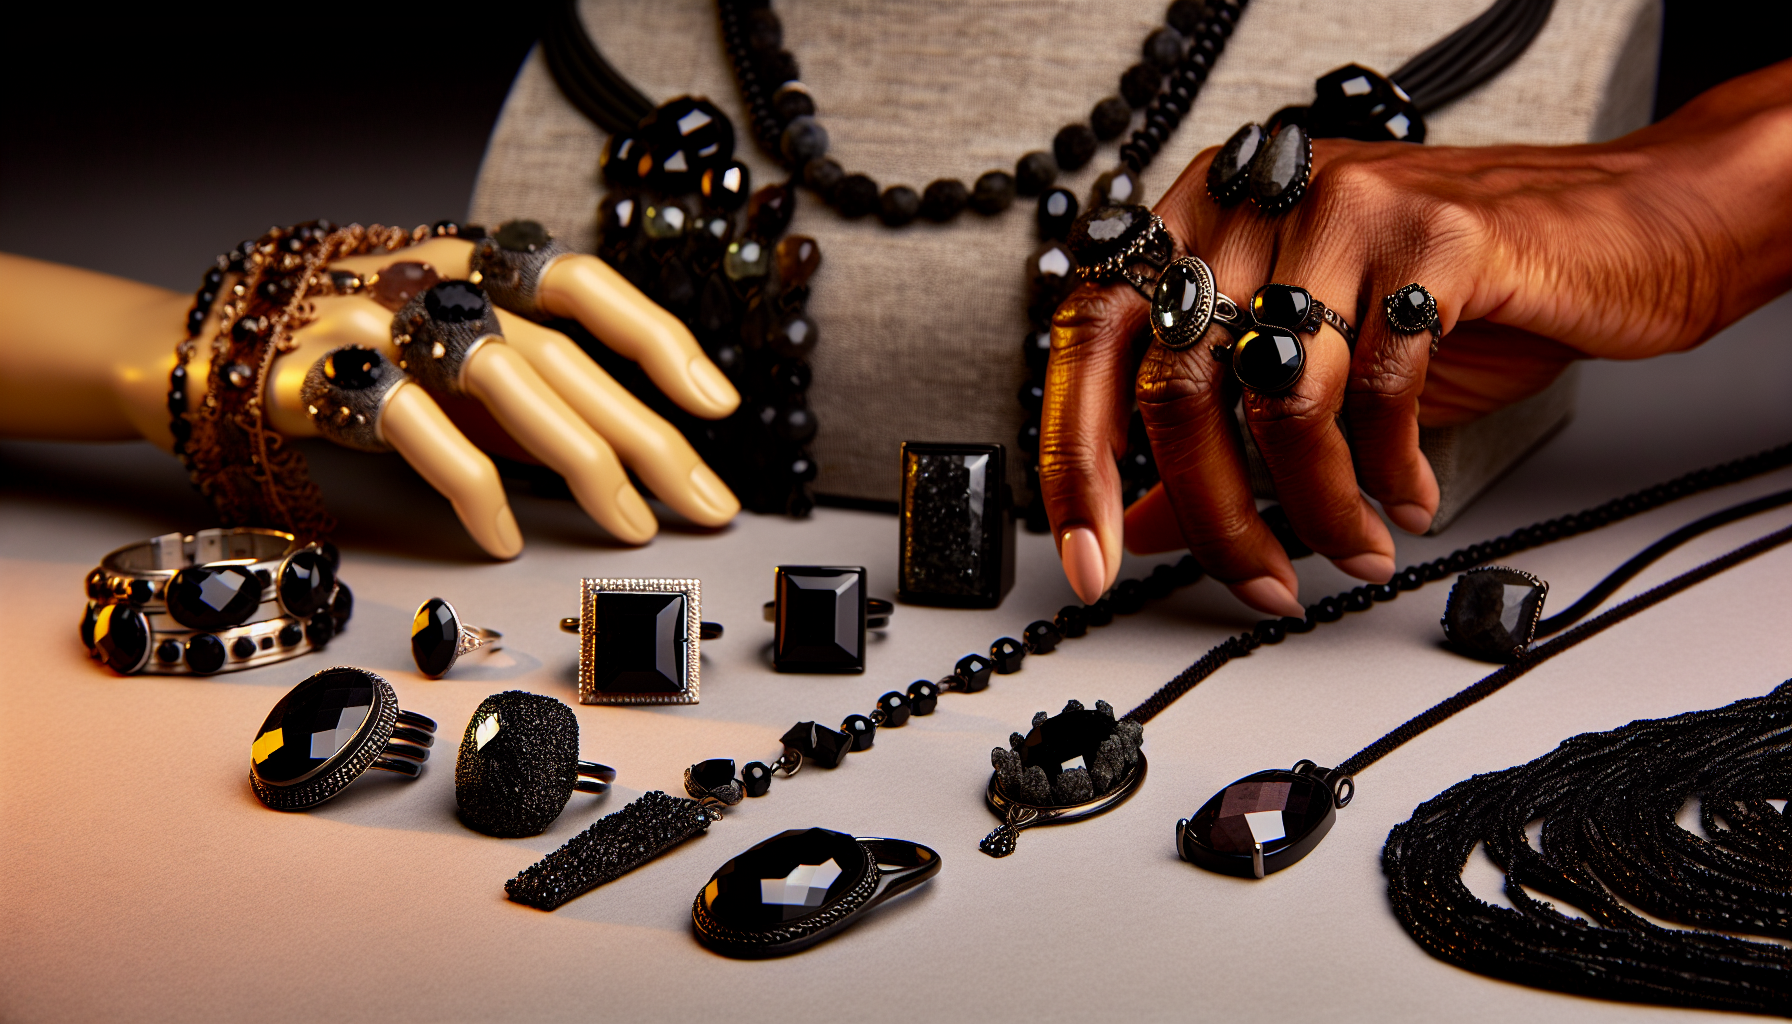 Fashion accessories with black tourmaline and obsidian gemstones